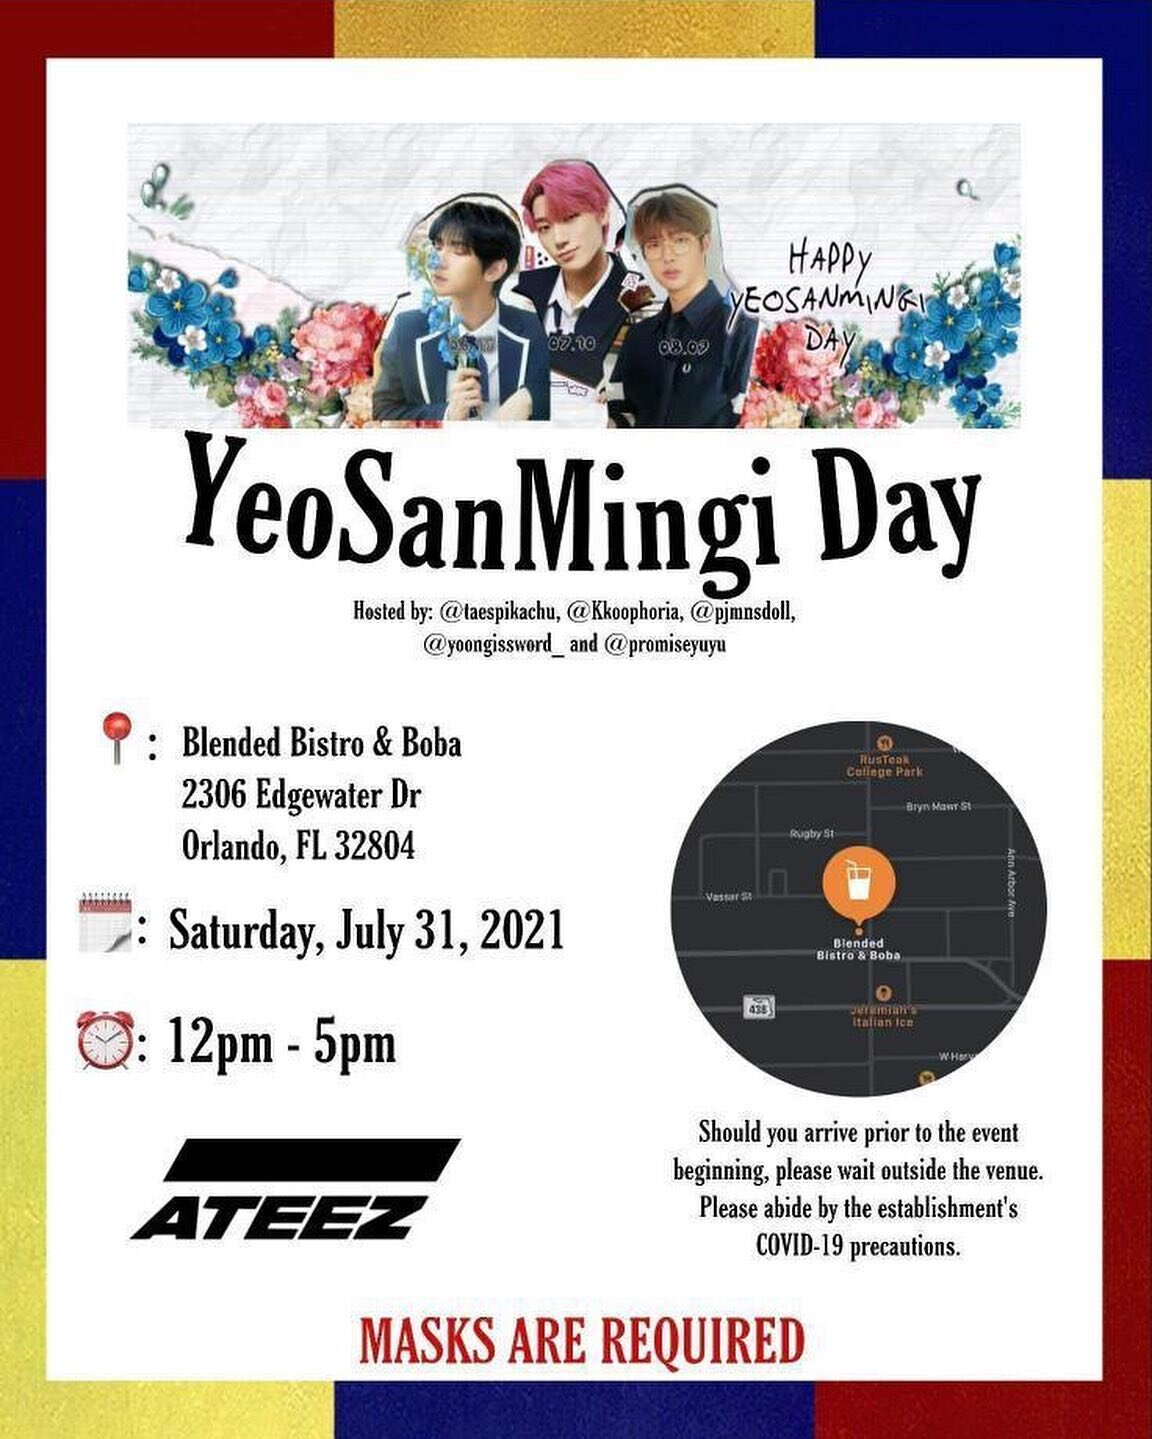 🌸YeoSanMingi Day🌸

Calling all ATINY and Kpop fans, come celebrate with us on this special day🥳🥳

Special Drinks 🧋

🥭🍑Fix On (MINGI)- Mango and Peach Fruit Slush w/ Passion Fruit Popping 

☀️Sanshine (SAN)- Rose Fruit Tea w/ Lychee Jelly

🍓St